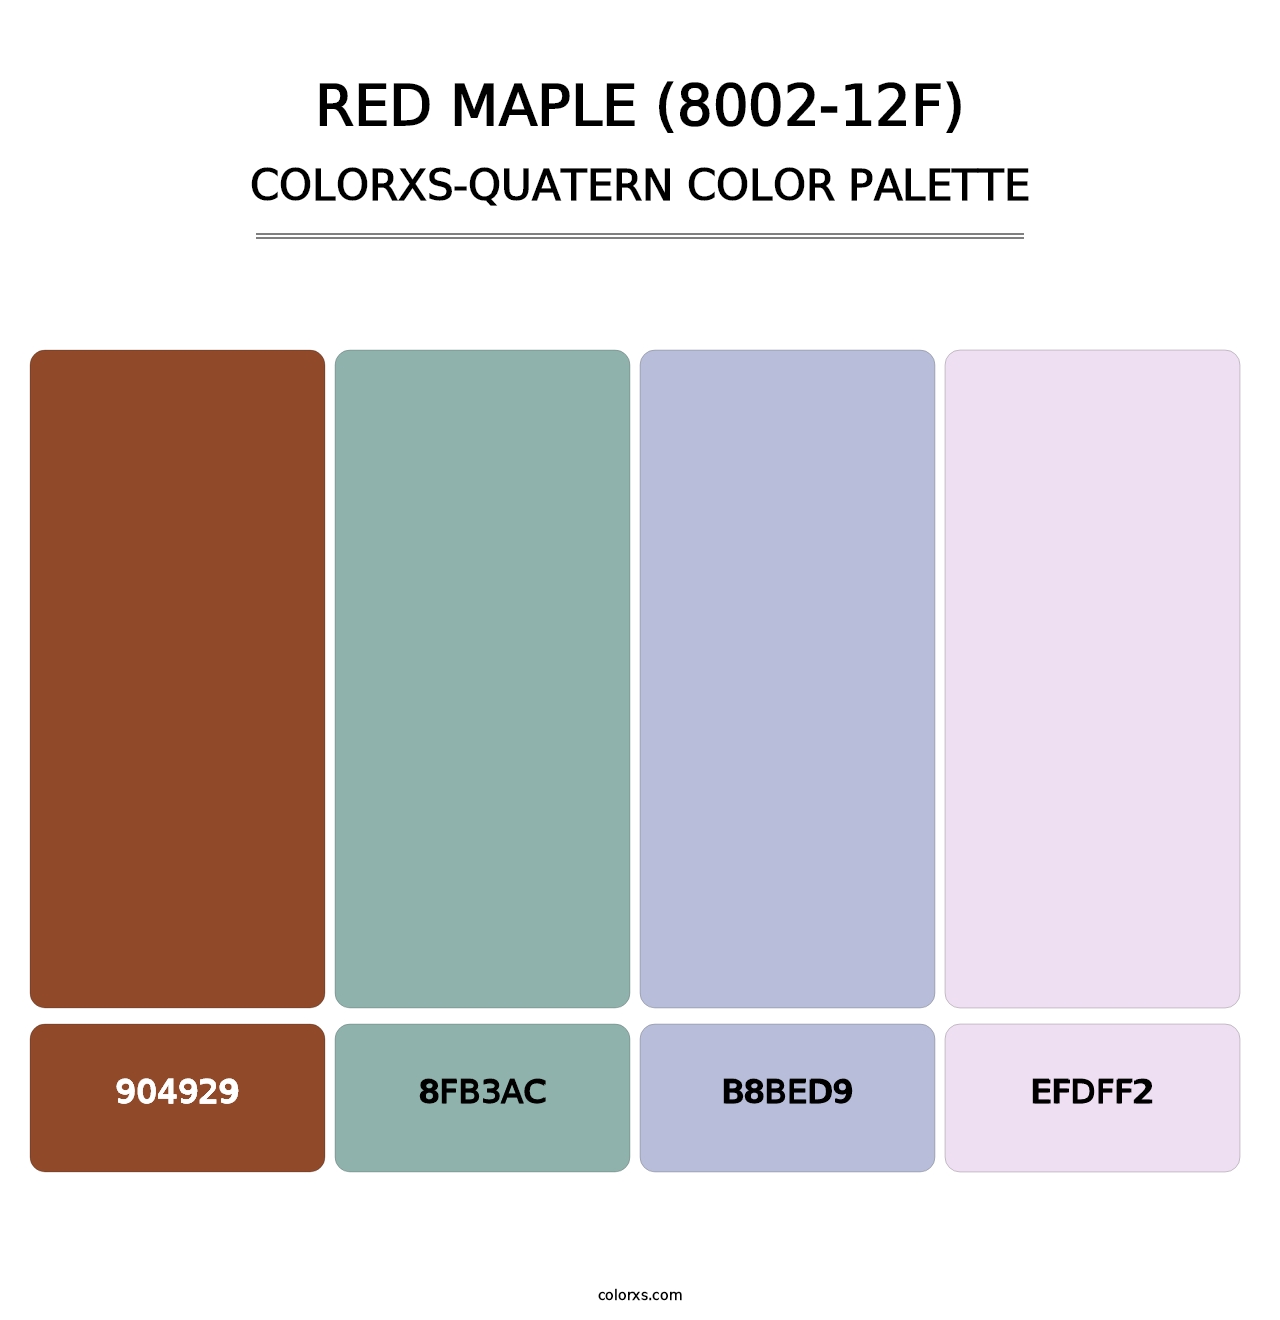 Red Maple (8002-12F) - Colorxs Quatern Palette